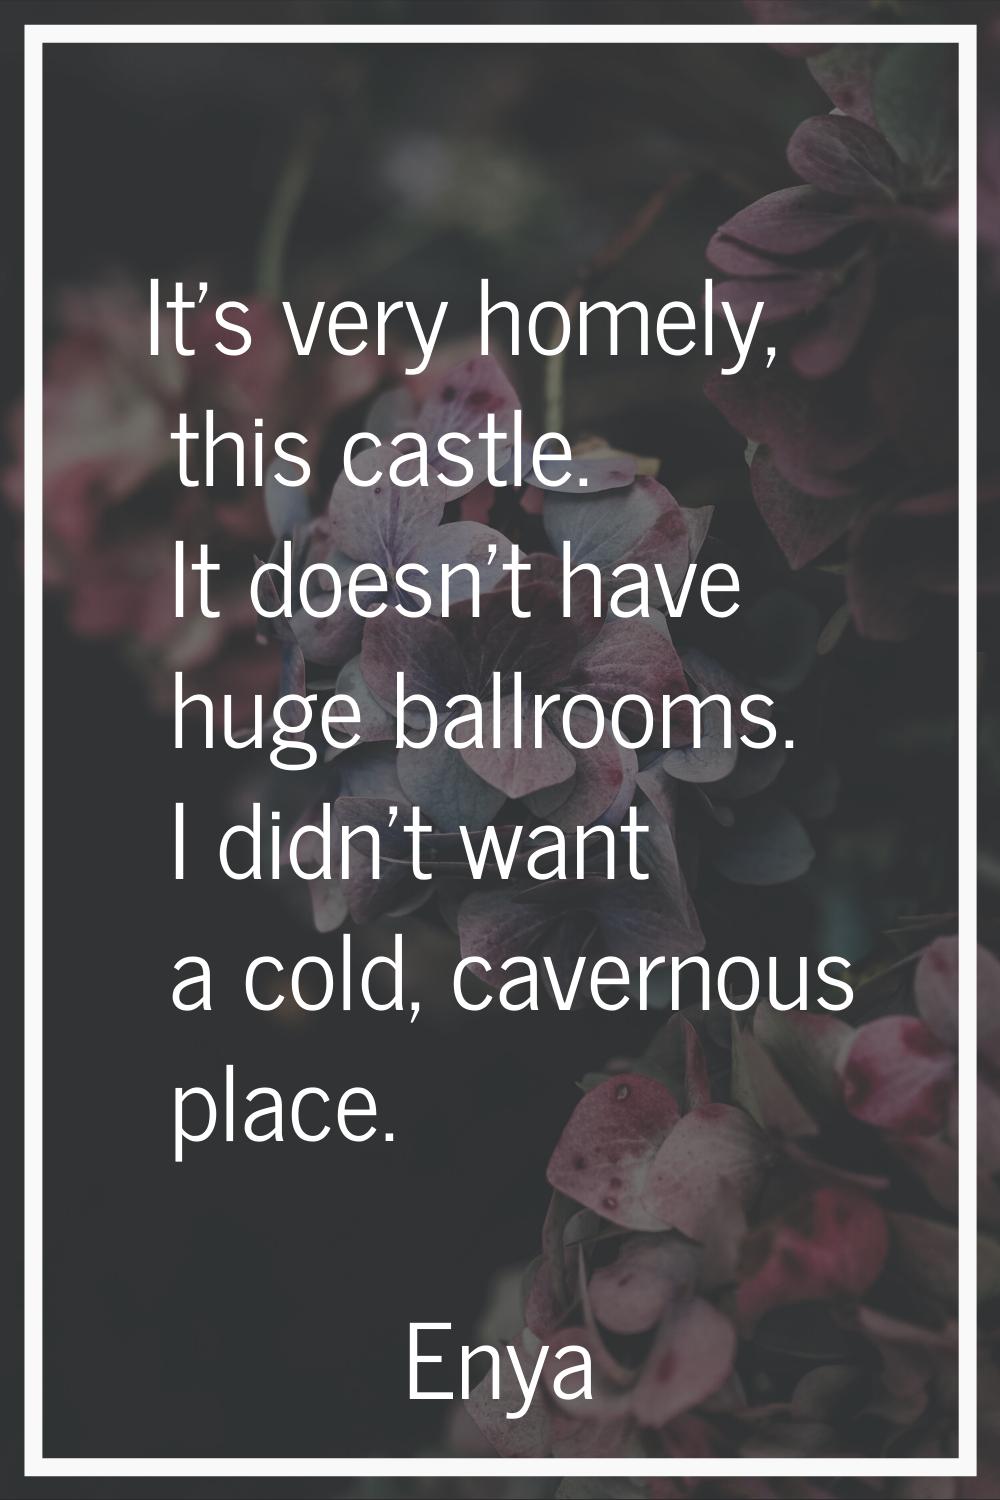 It's very homely, this castle. It doesn't have huge ballrooms. I didn't want a cold, cavernous plac